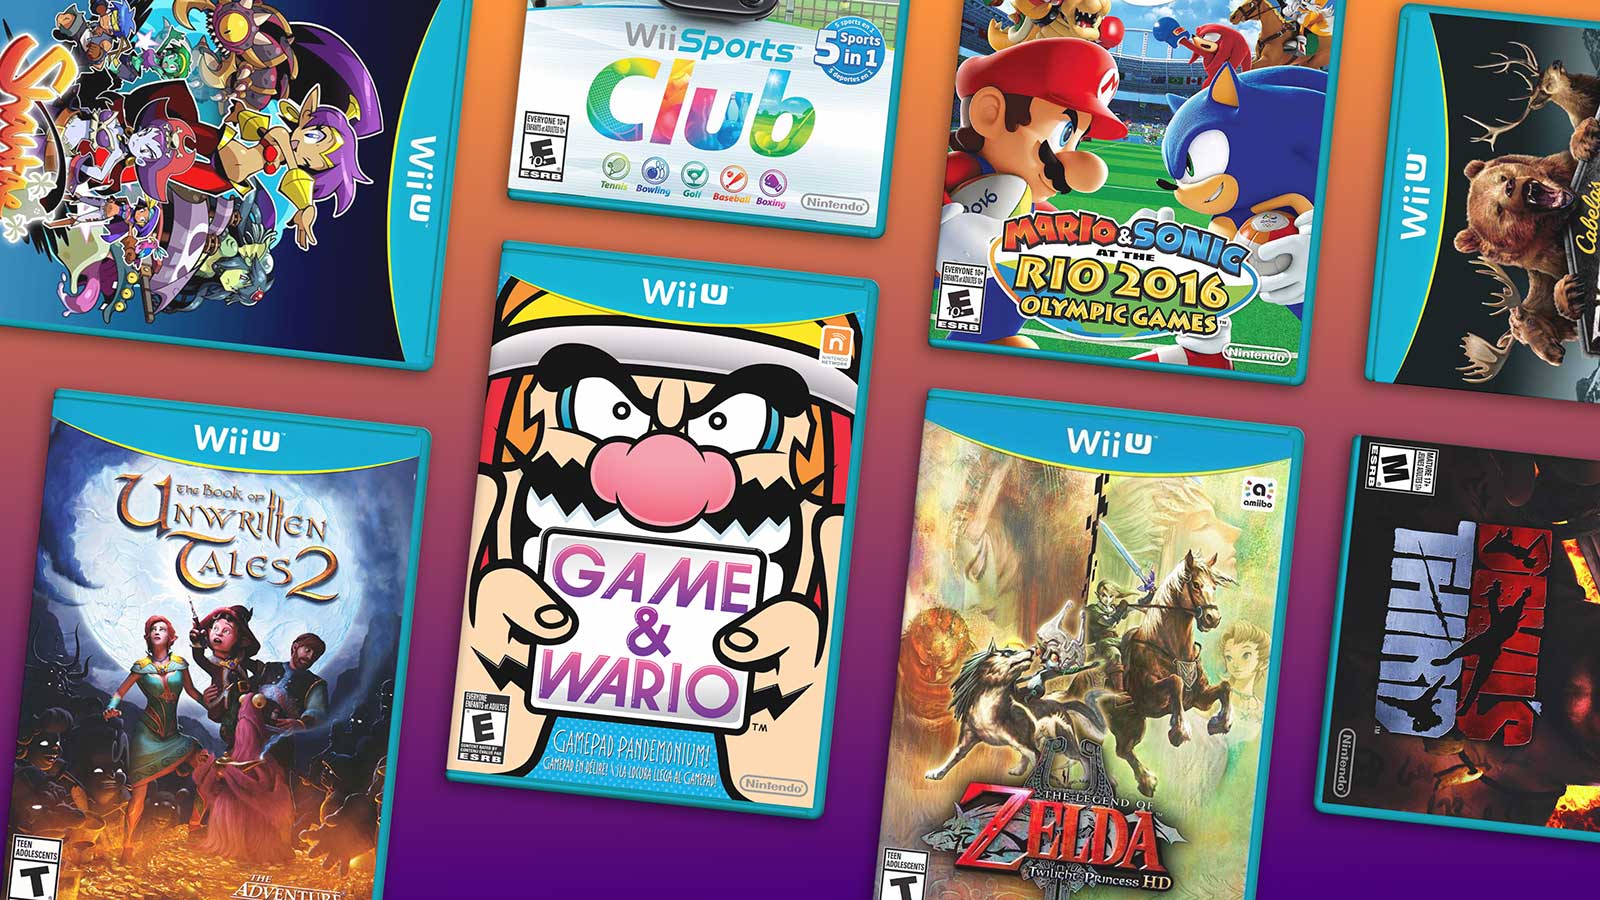 The Rarest & Most Valuable Nintendo Wii U Games - RetroGaming with Racketboy